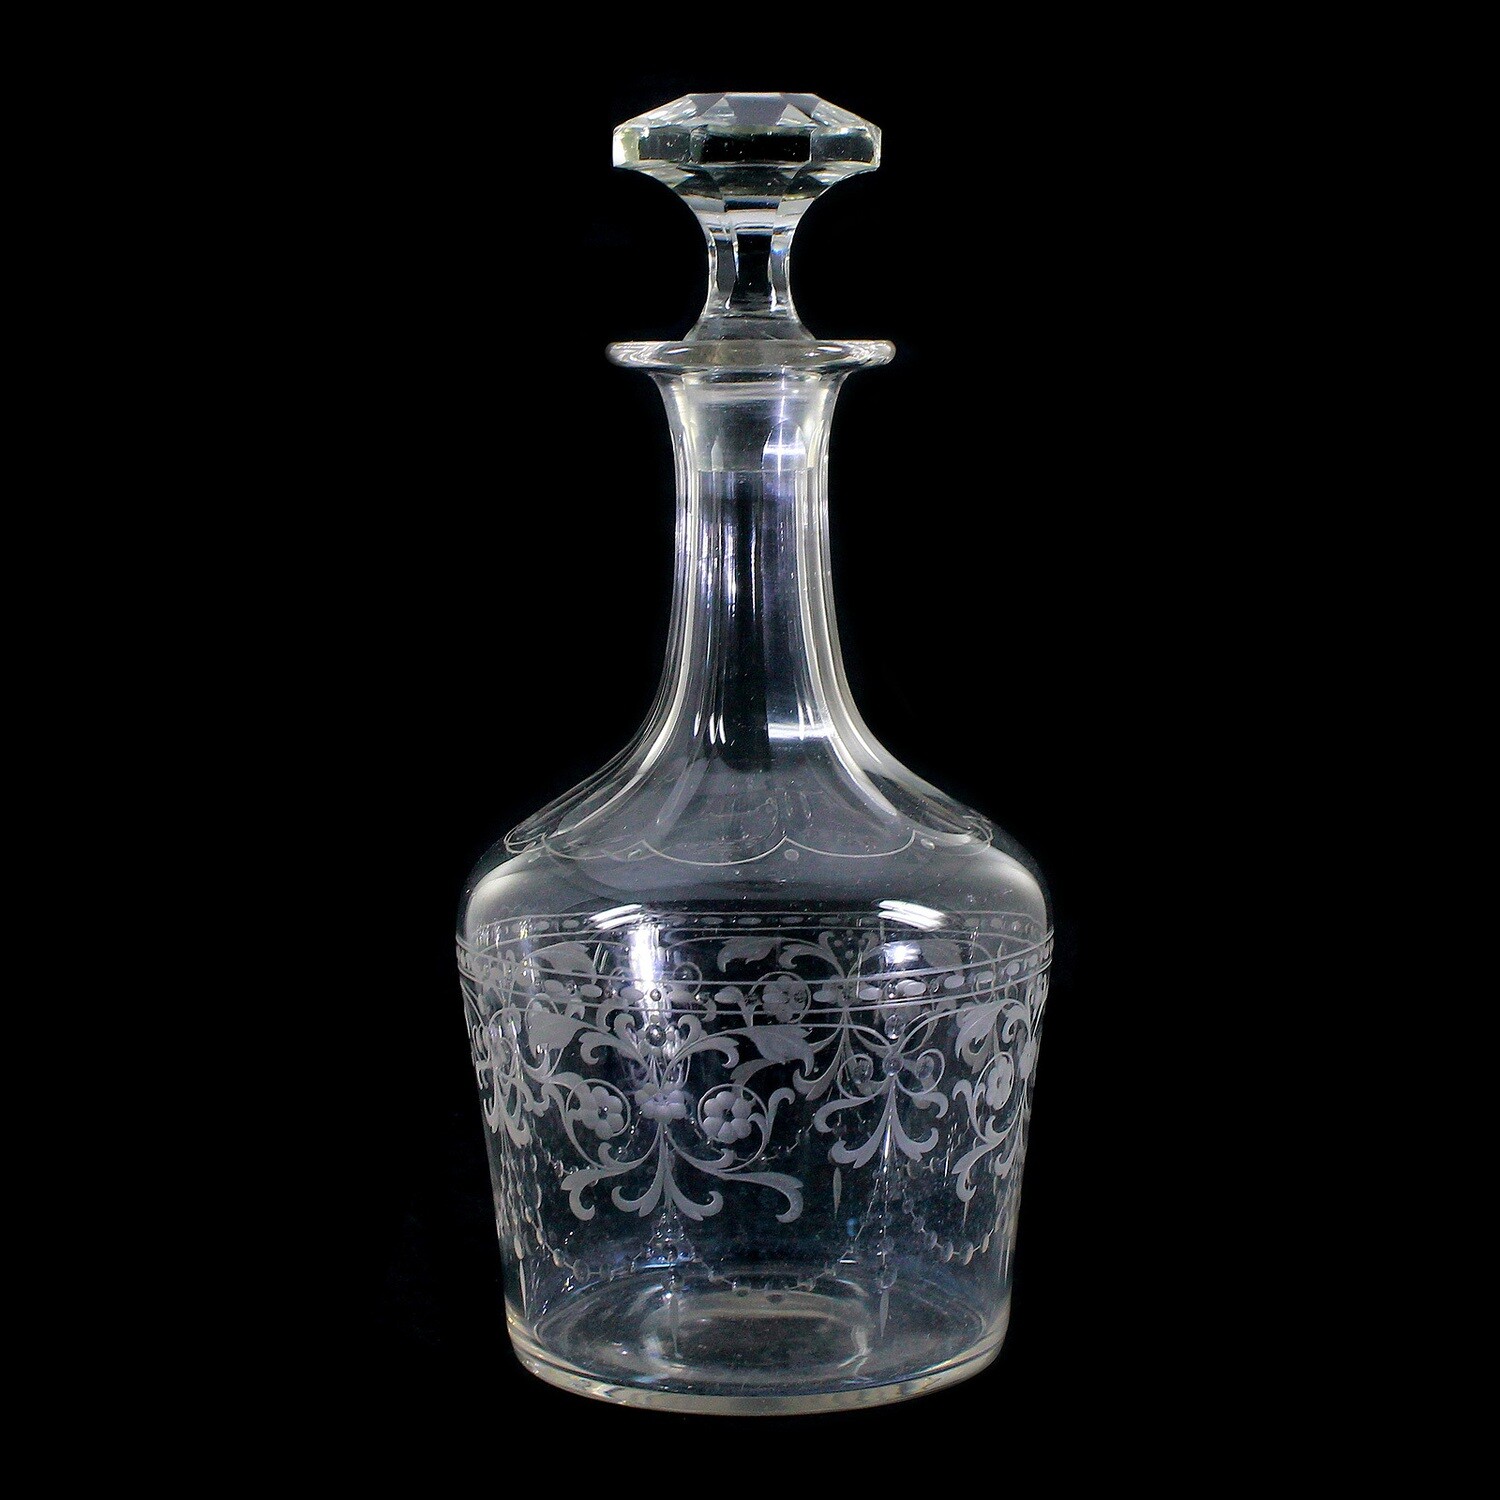 Carafe made of colorless glass with decorative cut decoration in the Renaissance style, around 1870-90.